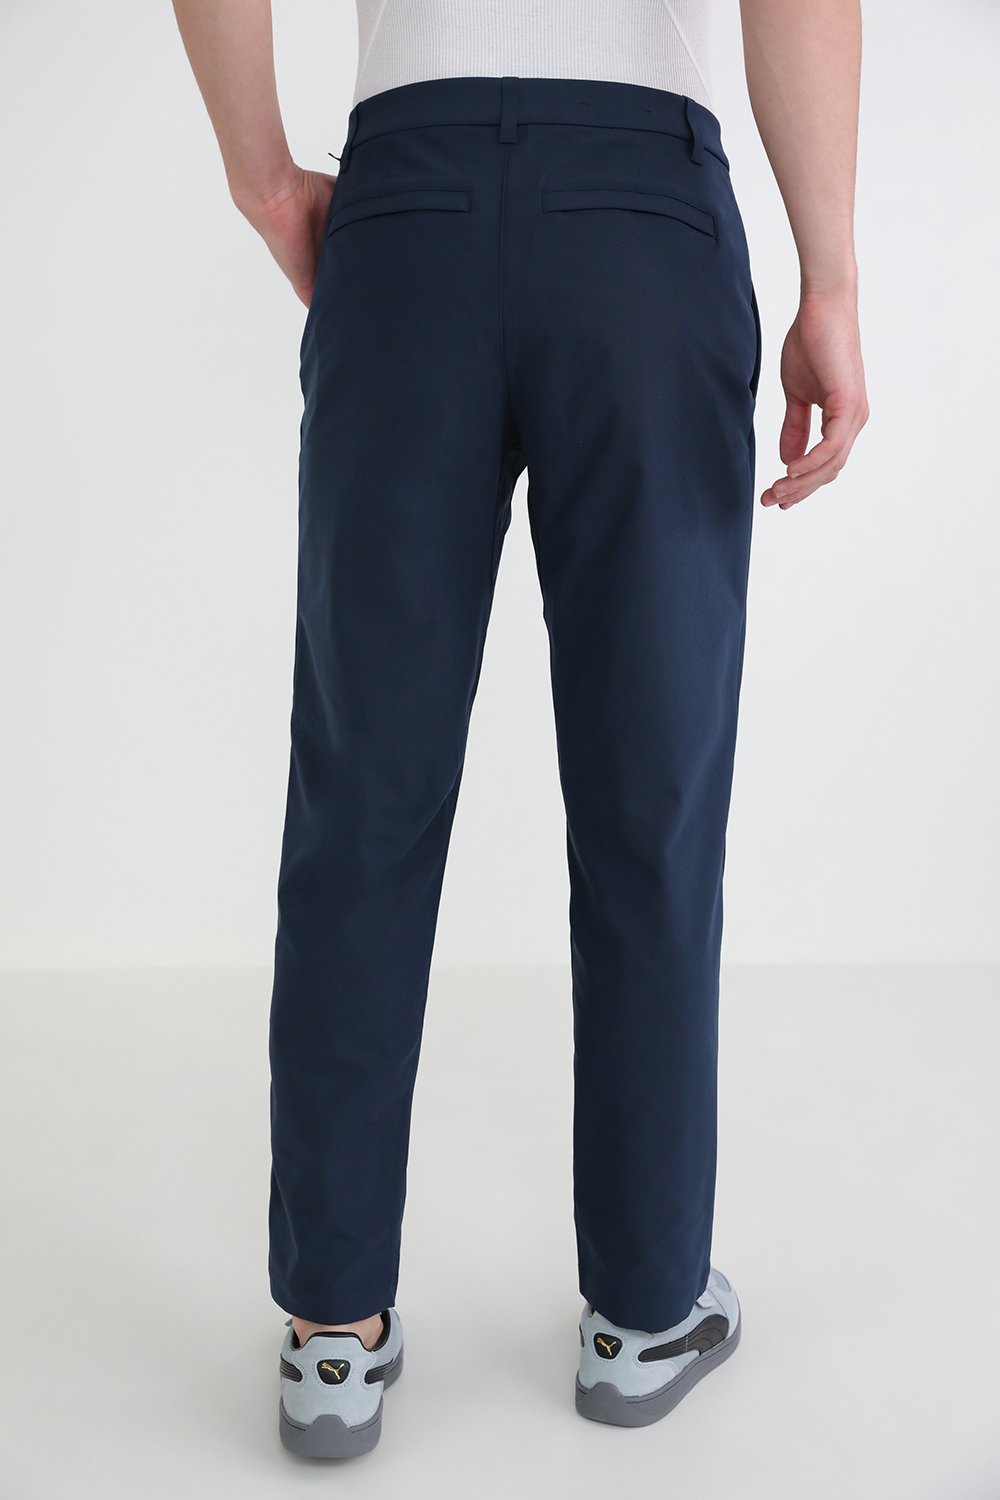 ABC Relaxed Fit Trousers 32 L LULULEMON